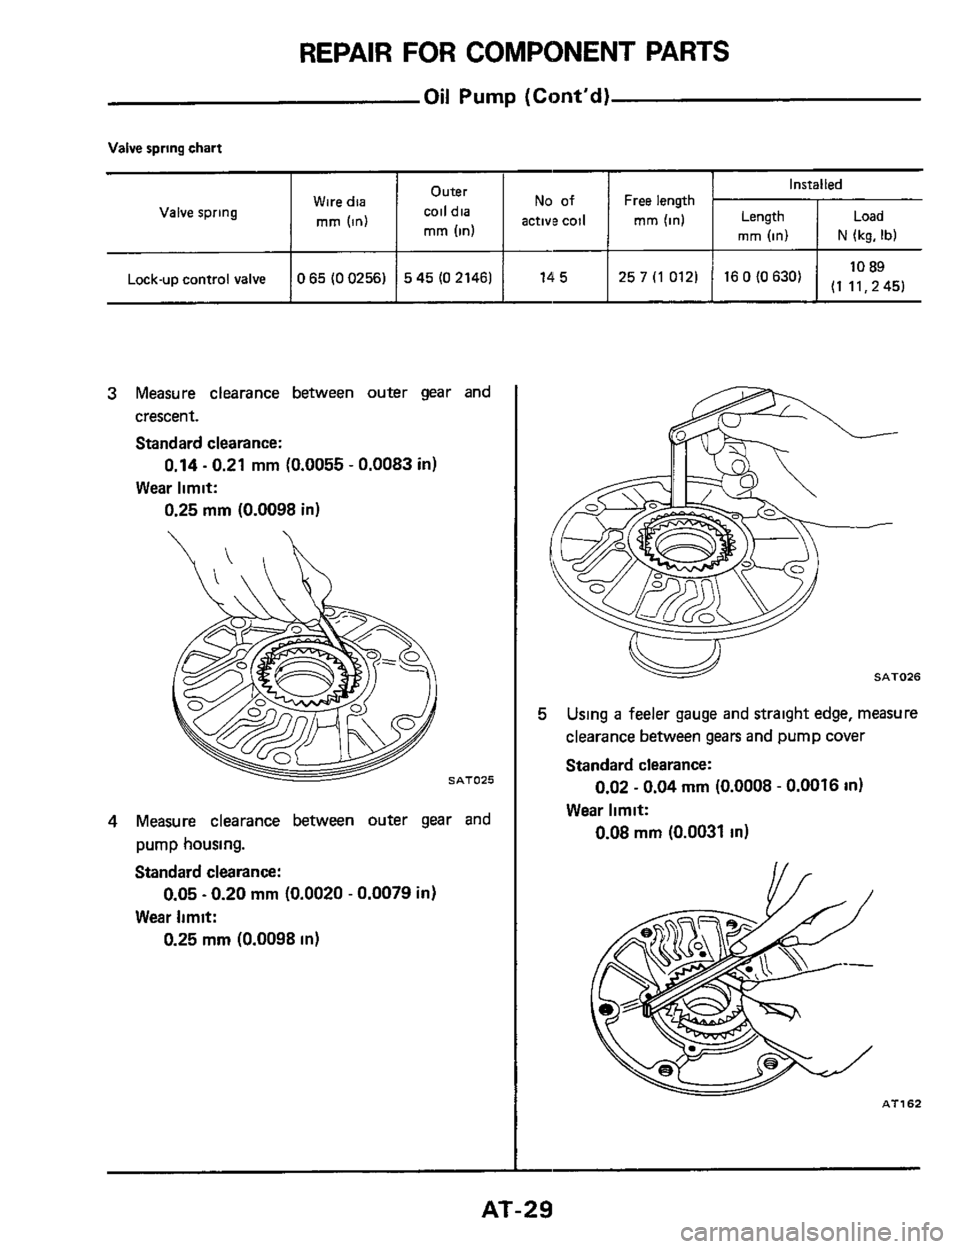 NISSAN 300ZX 1984 Z31 Automatic Transmission Workshop Manual REPAIR FOR COMPONENT PARTS 
No of 
active coil 
Outer 
coil dia 
rnrn (in) 
Wire dia 
rnrn (in) Valve  spring 
Oil Pump (Cont’d) 
Valve  spring  chart 
Installed 
Length 
rnrn (in) N (kg. Ib) 
Free 